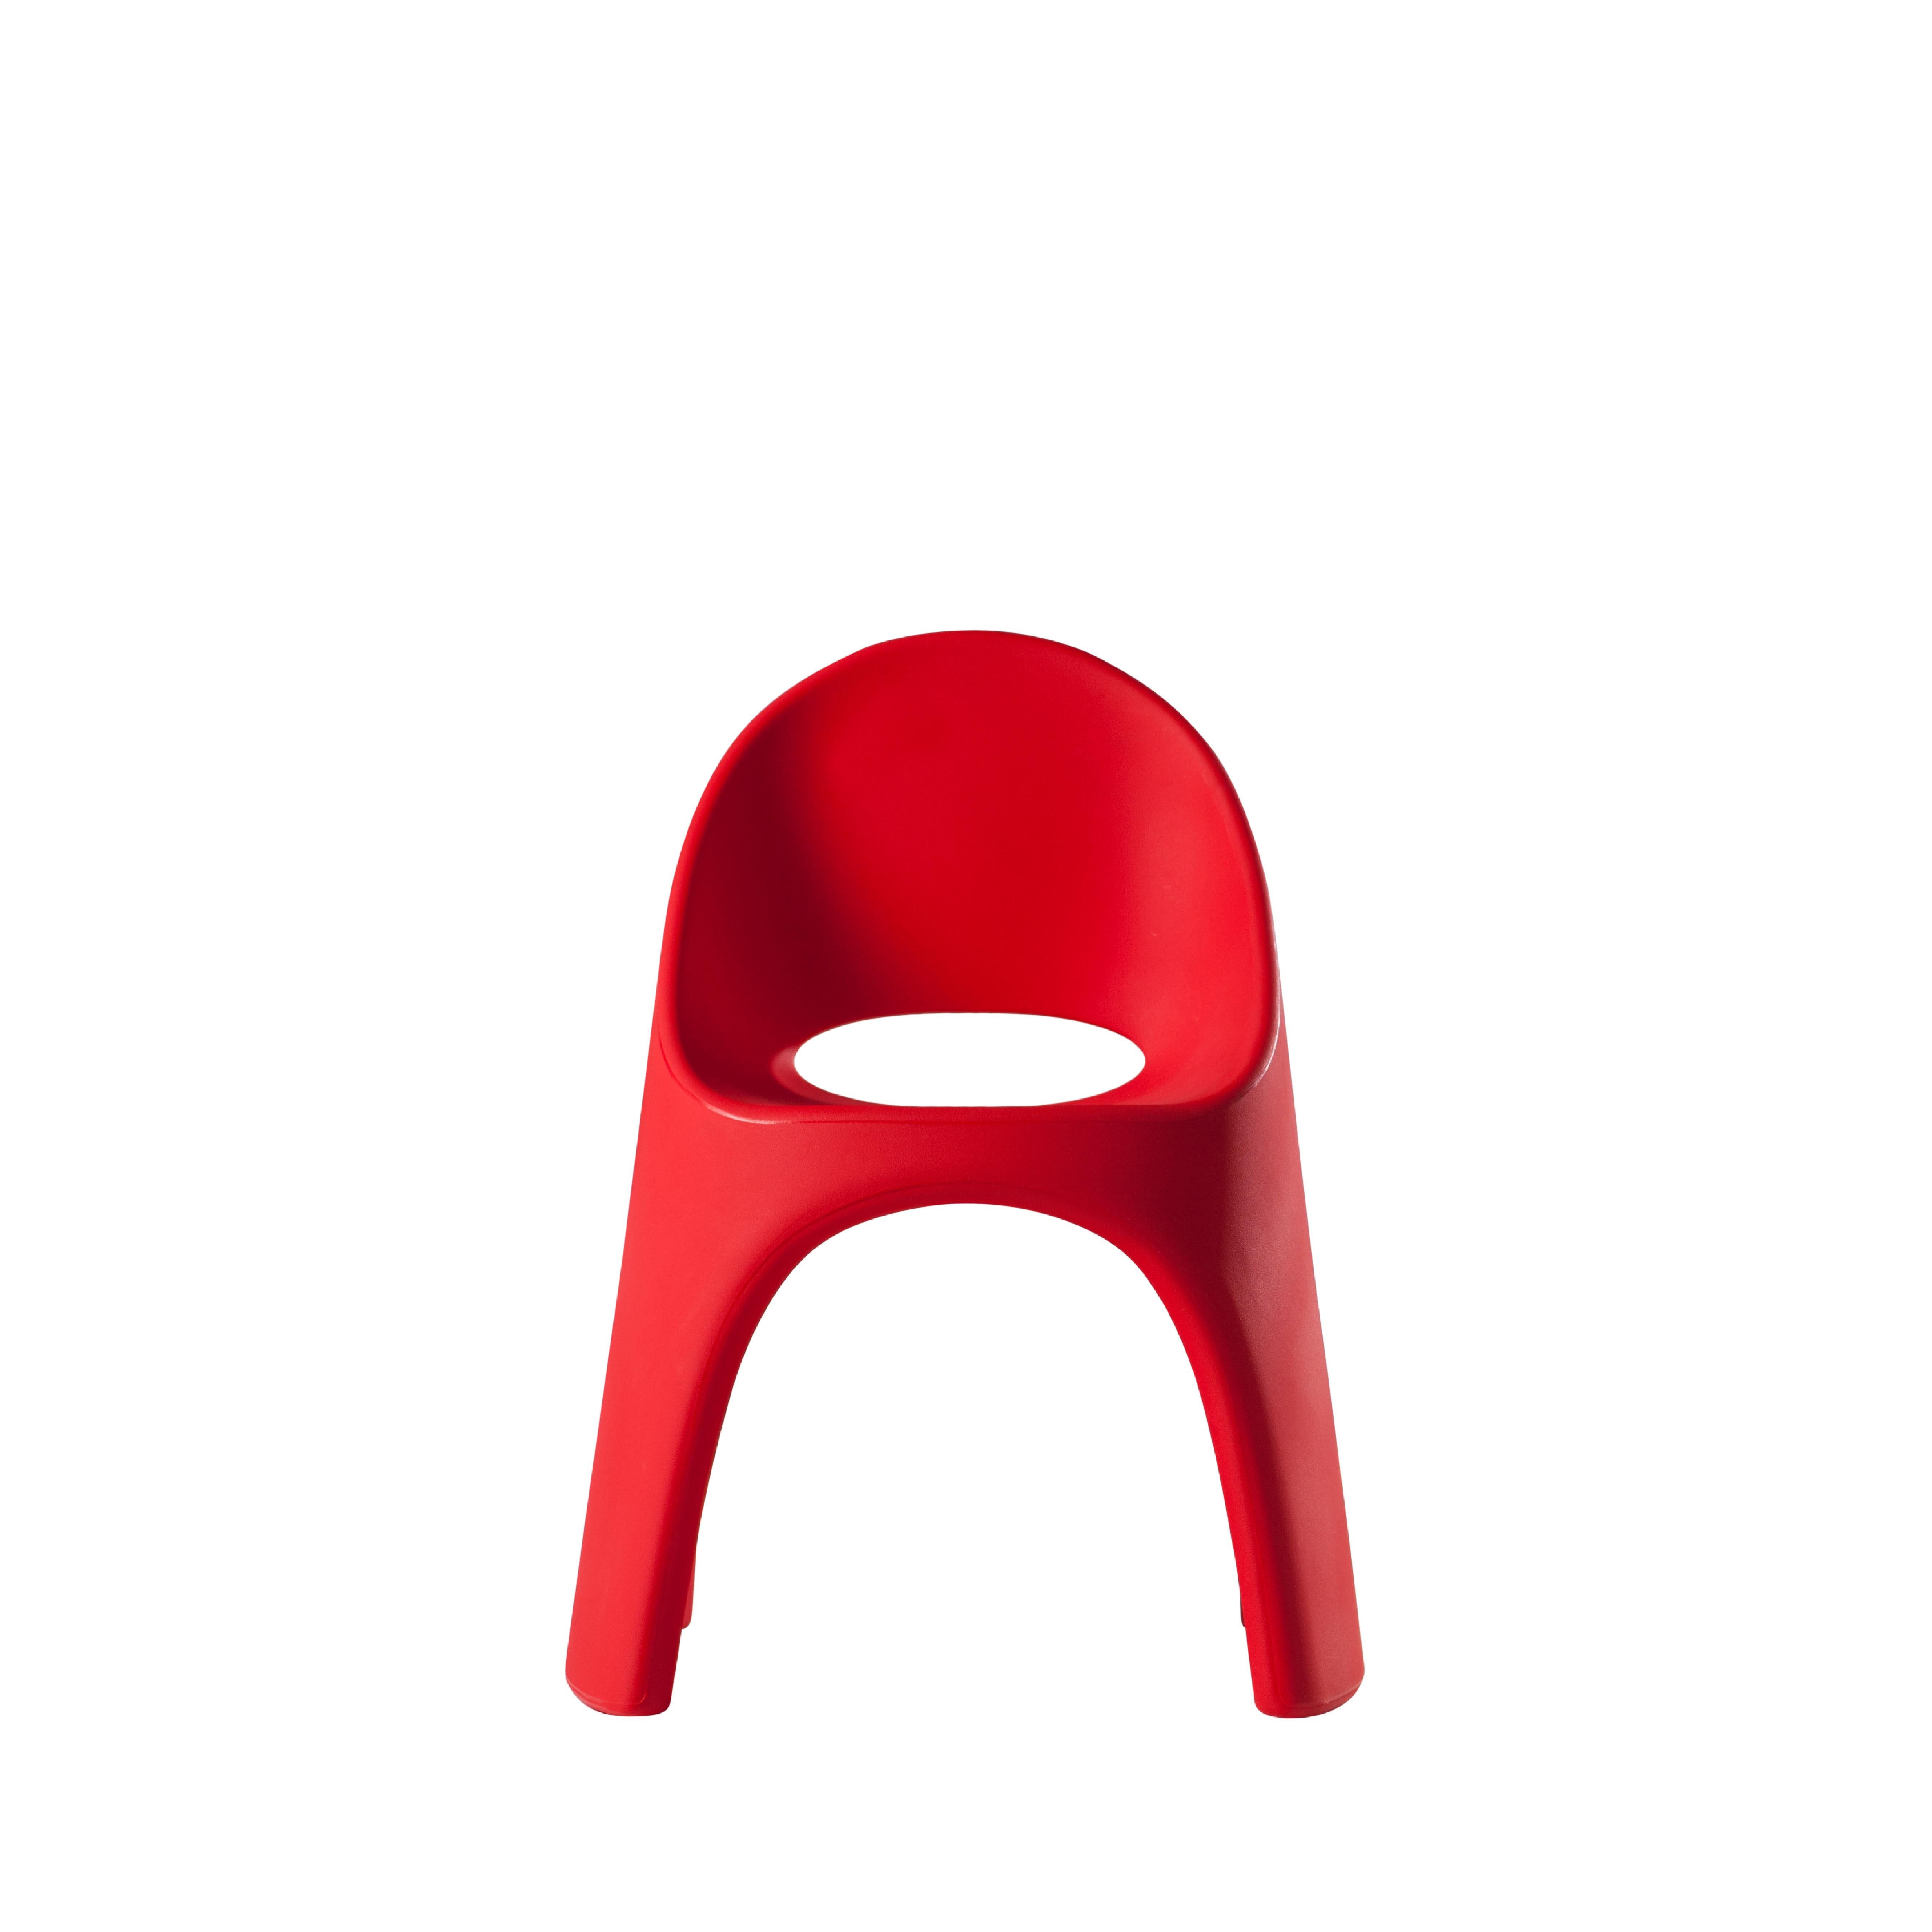 Italo Pertichini designs Amélie, a family characterized by fluid and sinuous lines. The designer creates a family of indoor and outdoor furniture, both for domestic settings or contracts. Amélie is a chair in polyethylene that belongs to this